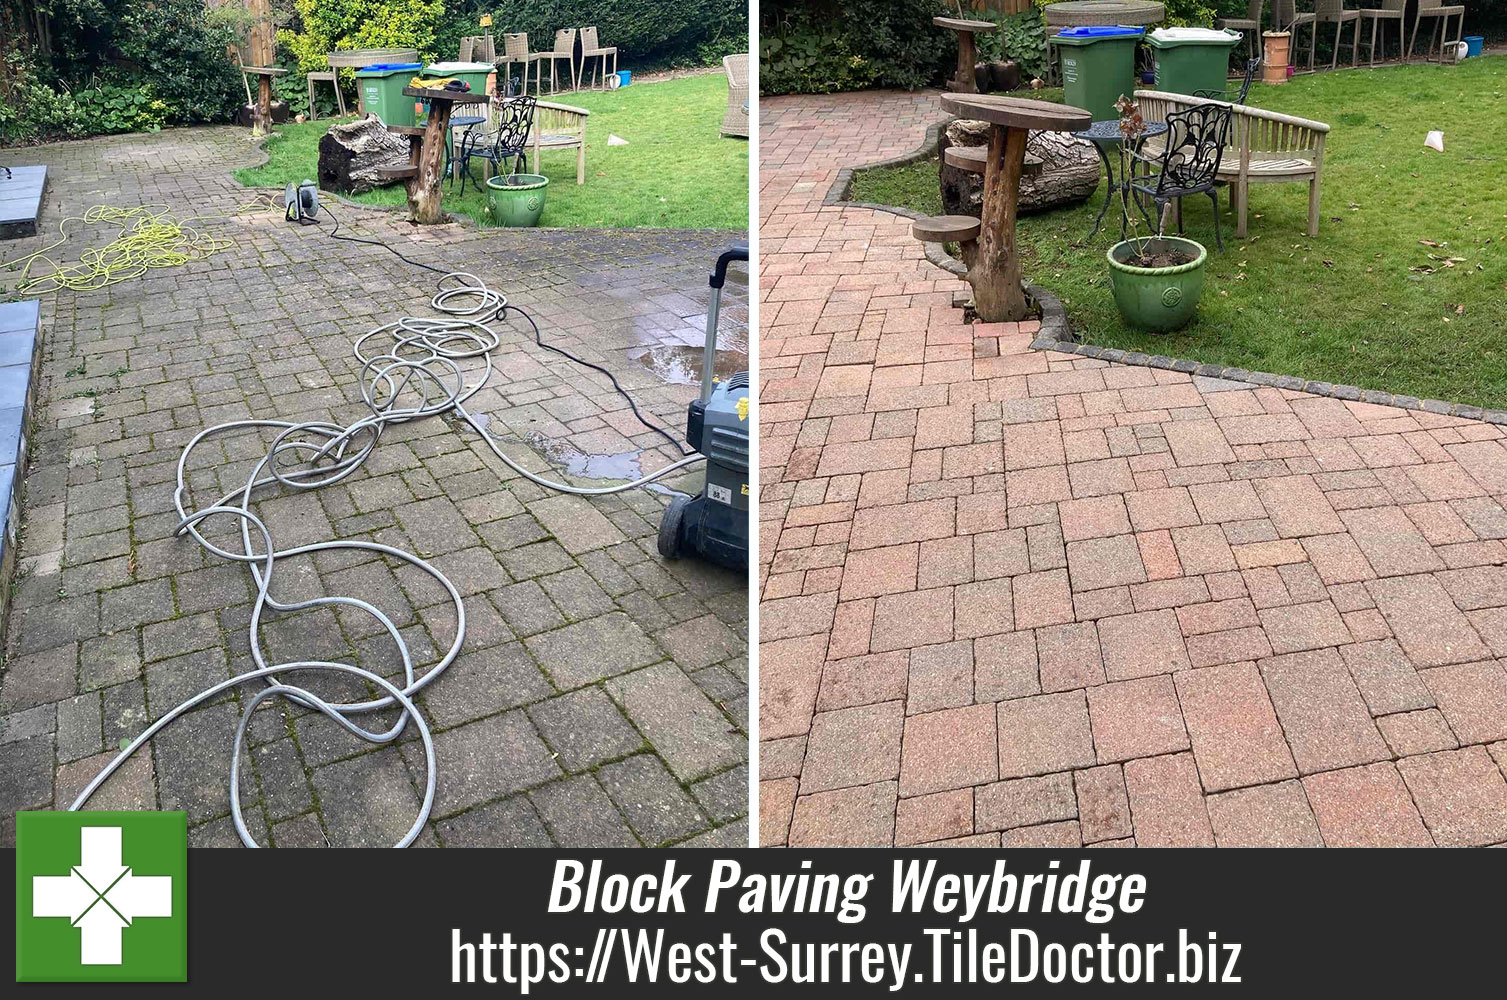 Deep Cleaning a Block Paved Patio in Weybridge with Patio & Brick Driveway Cleaner